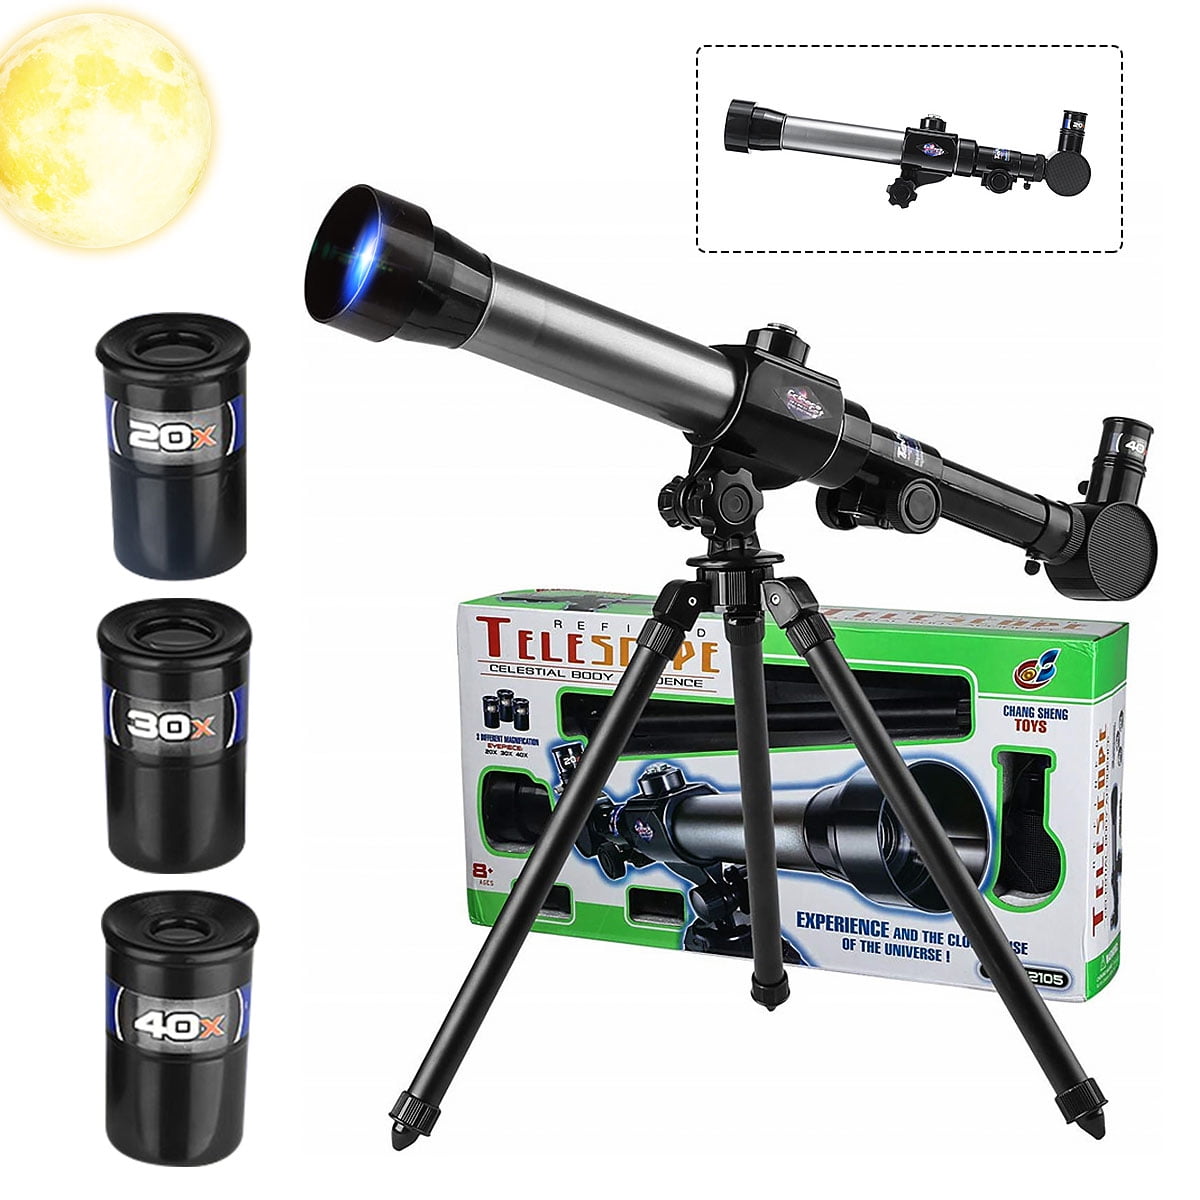 Early Science Educational Toys for Kids Children Teens Portable Travel Telescope Starter Scope with Tripod EBTOOLS Kids Astronomical Telescope